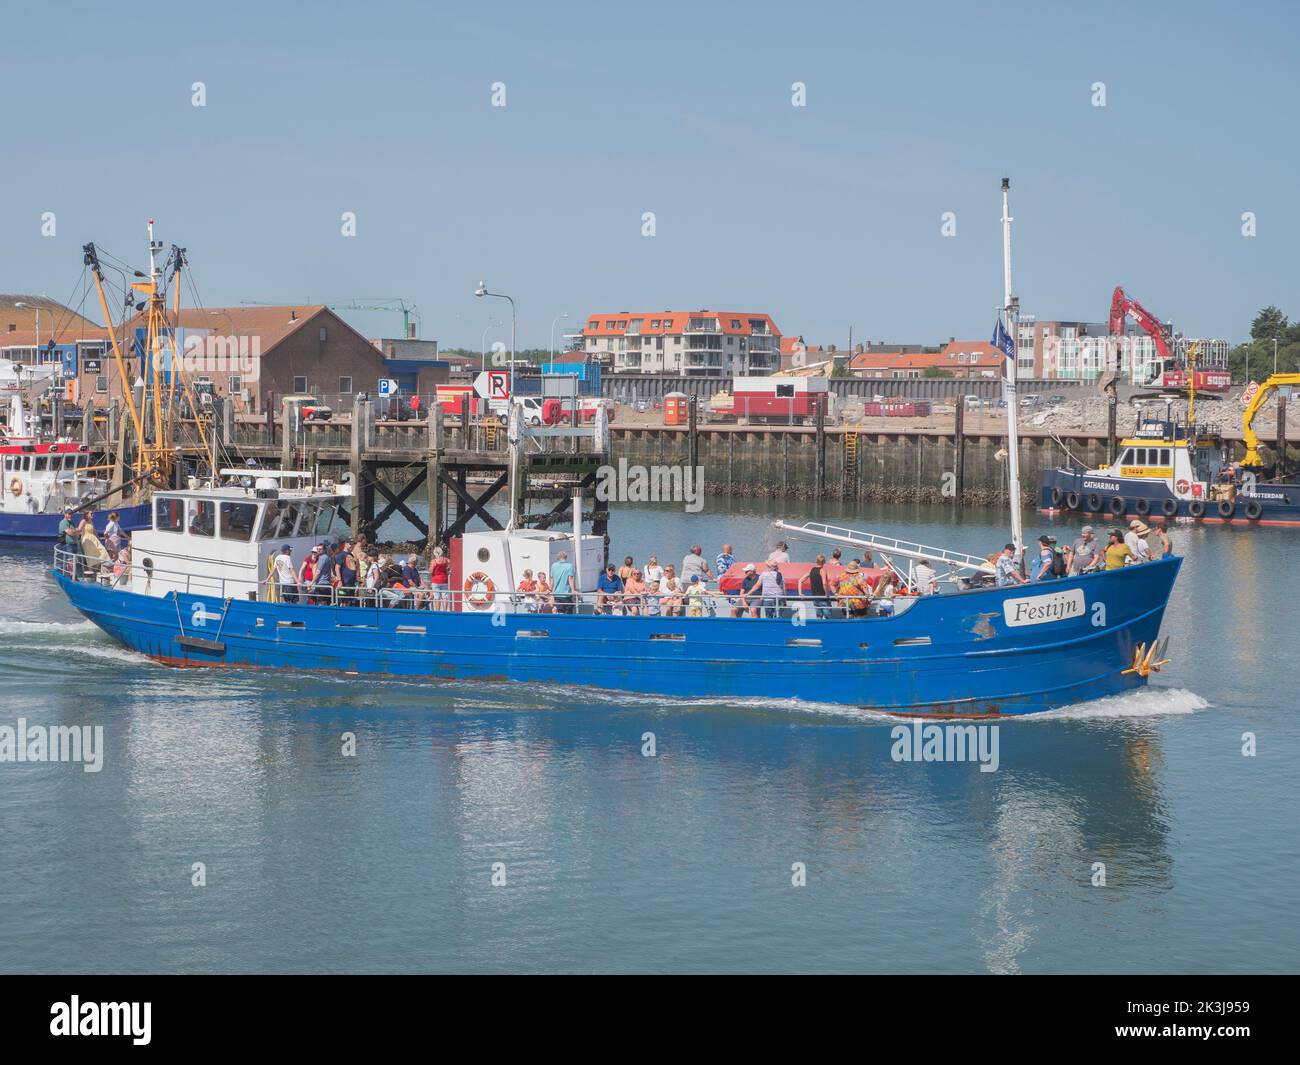 Breskens, Netherlands, July 18, 2022, De festijn, a converted mussel cutter now sails with tourists on the Western Scheldt Stock Photo